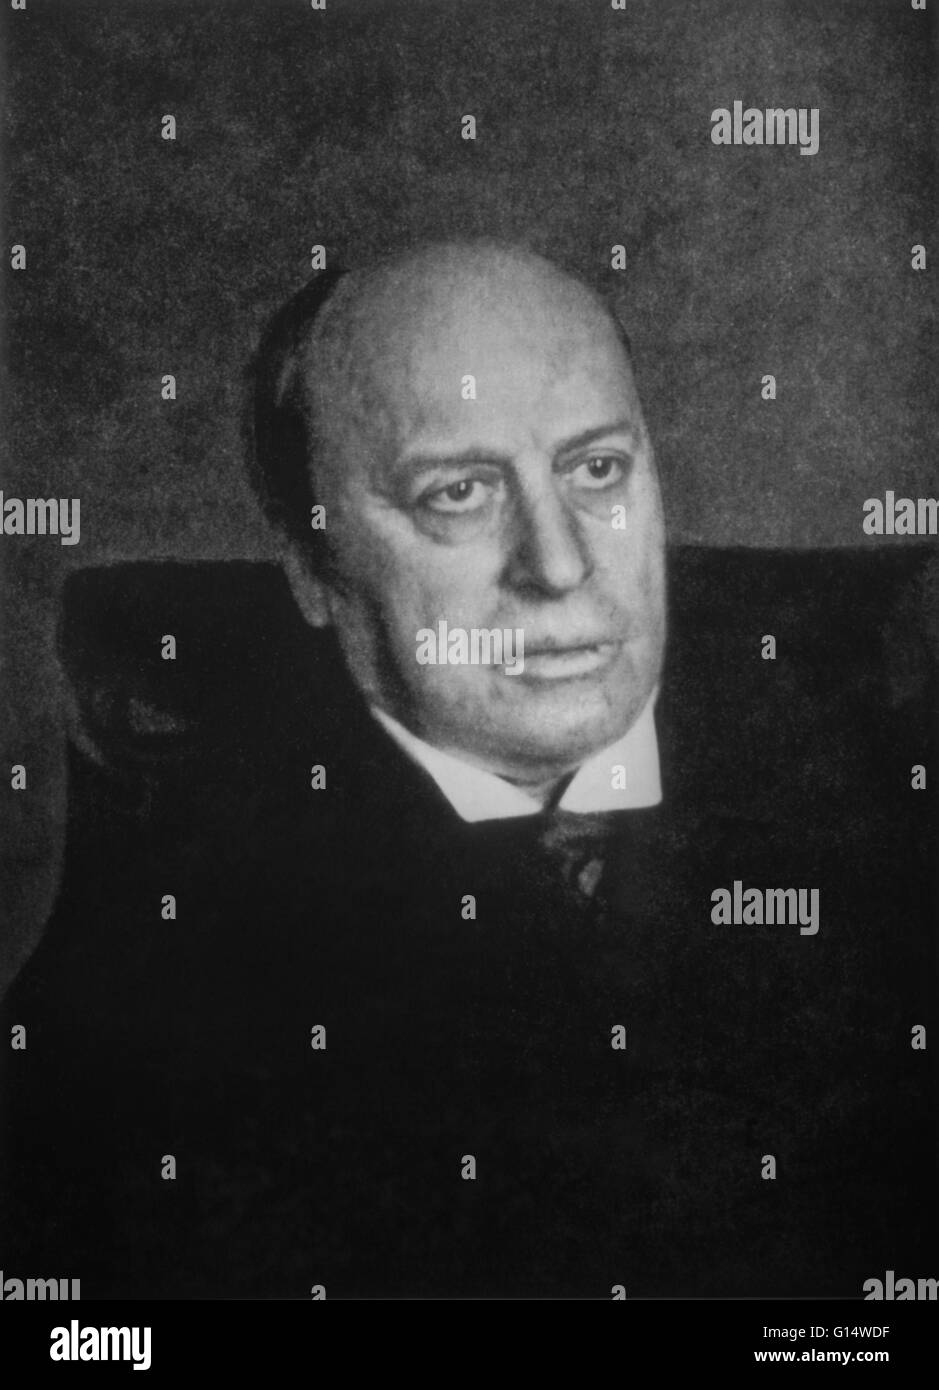 Henry James (April 15, 1843 - February 28, 1916) was an American-born writer, regarded as one of the key figures of 19th-century literary realism. James alternated between America and Europe for the first 20 years of his life, after which he settled in En Stock Photo